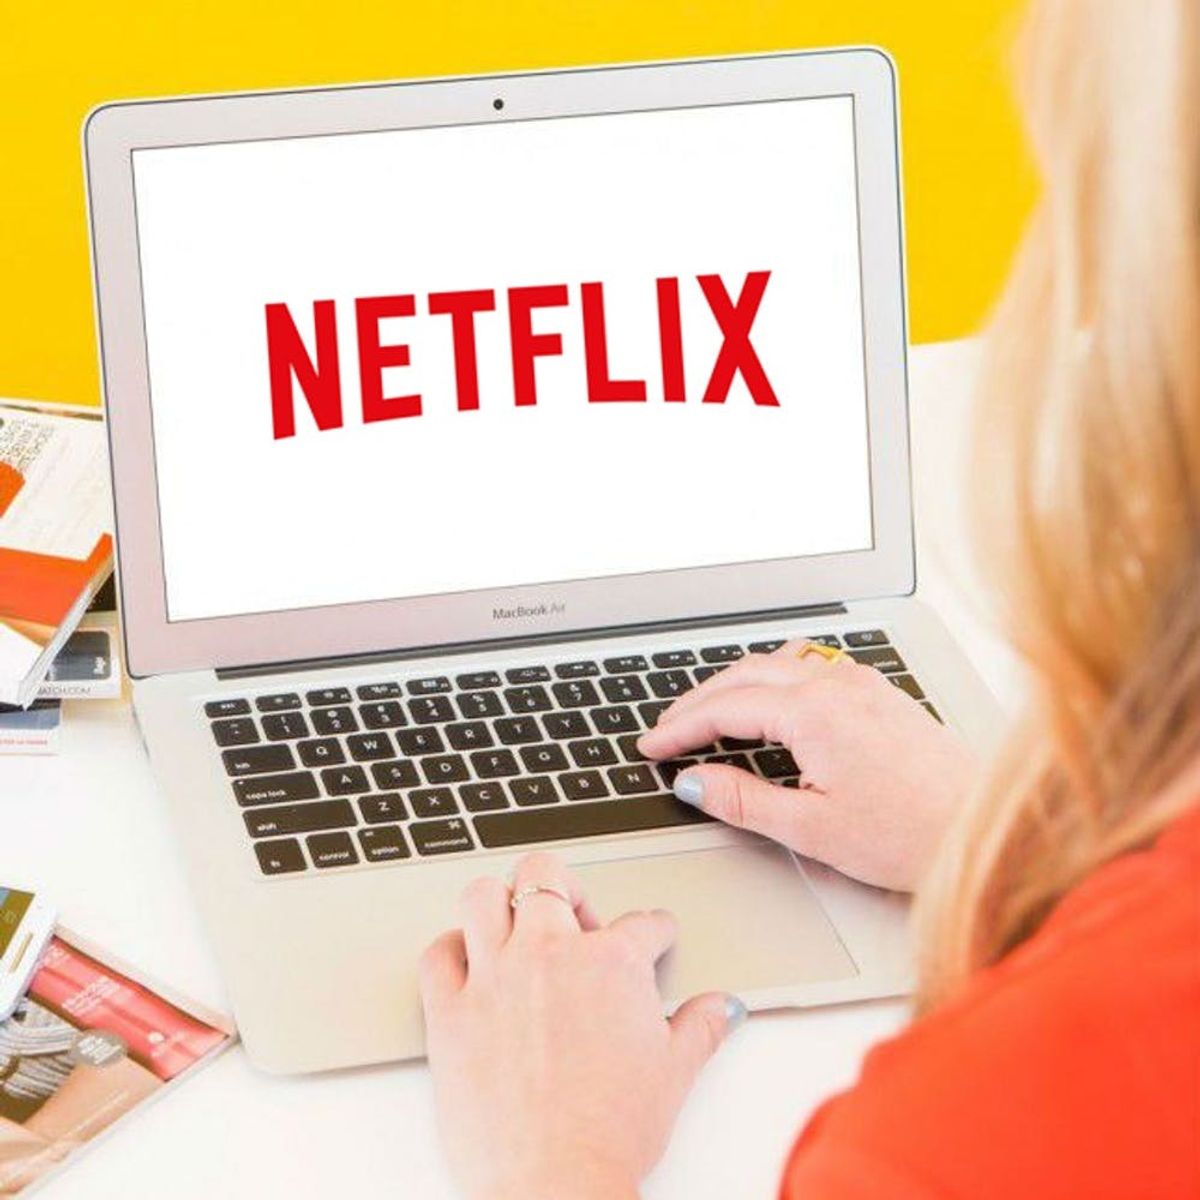 Netflix Is Finally Getting a Major Upgrade